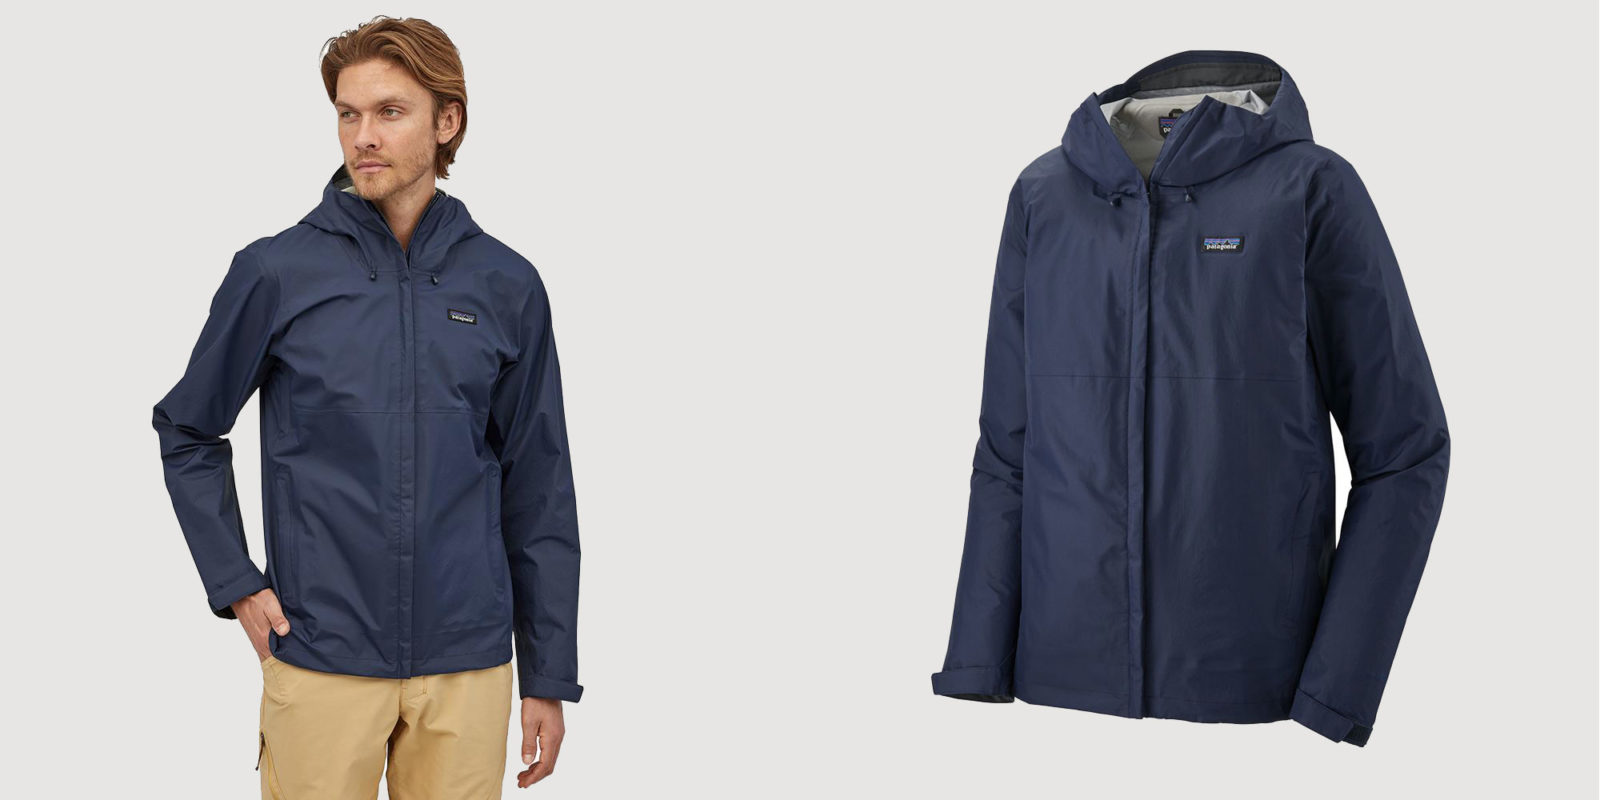 Stay Dry in Style With These 10 More Sustainable Rain Jackets - Good On You